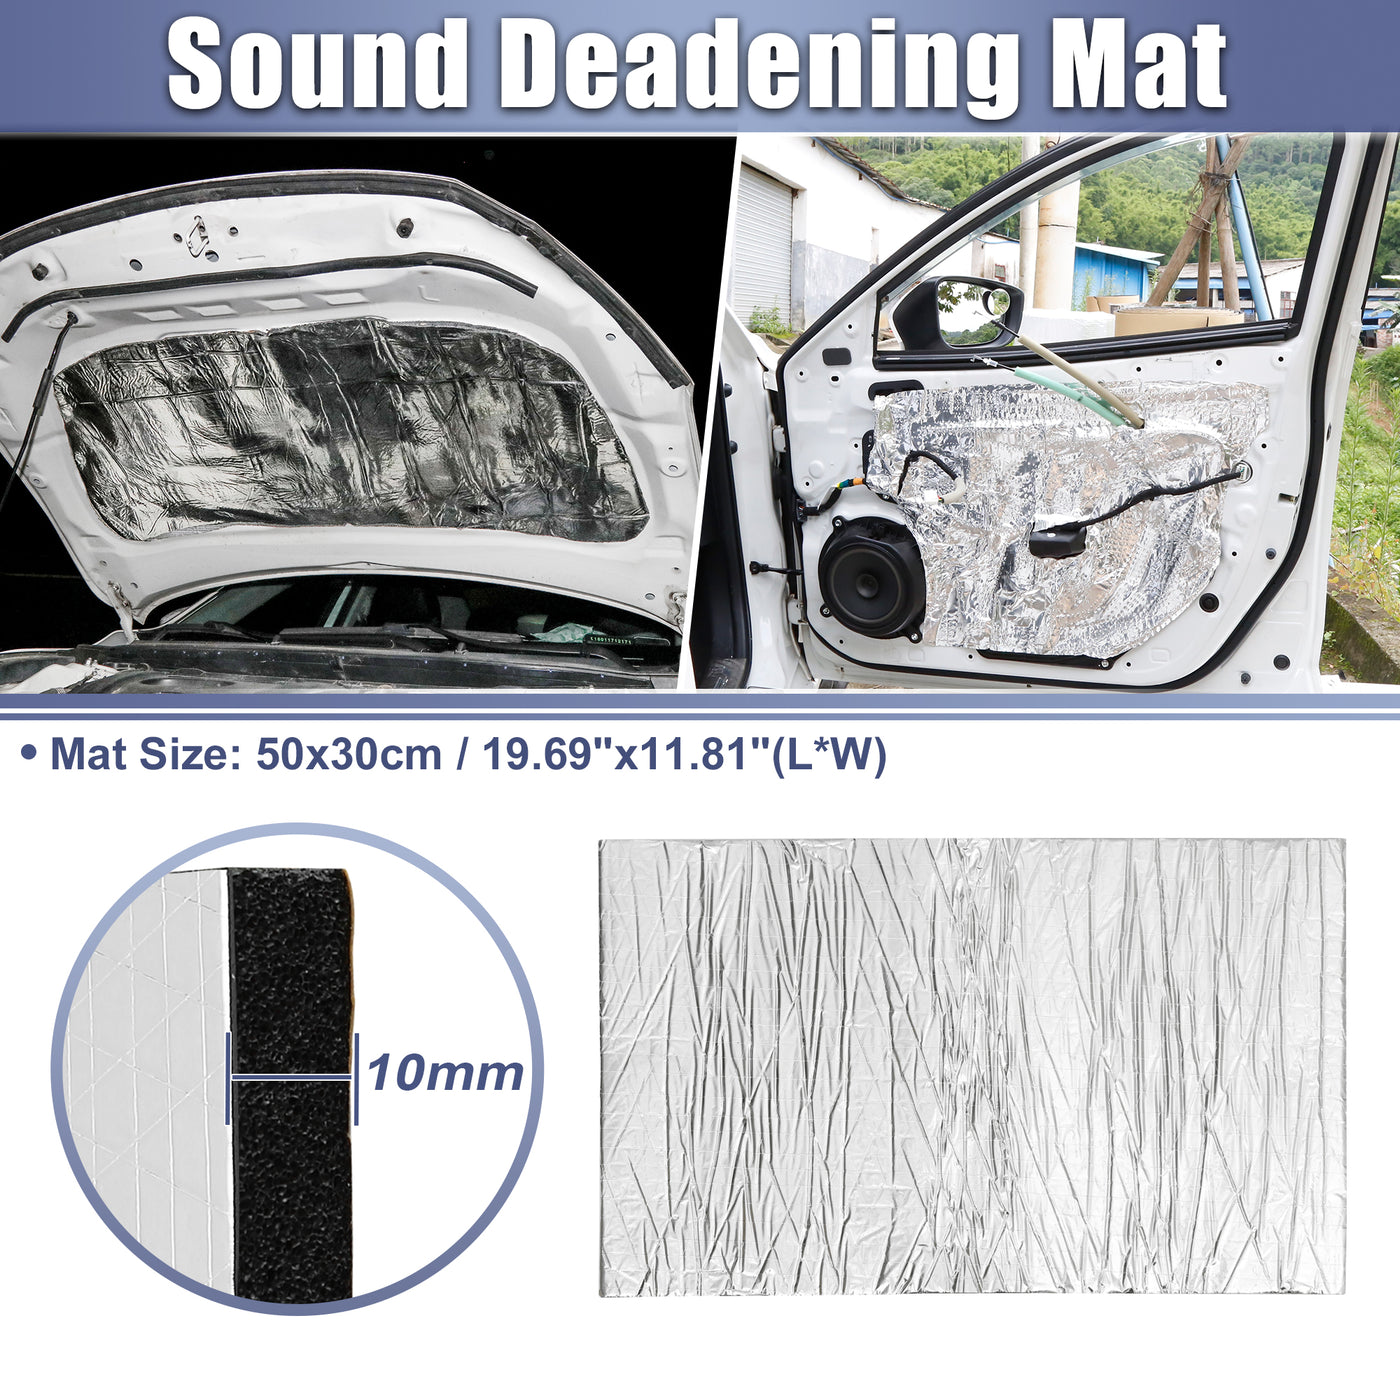 X AUTOHAUX 394mil 10mm 1.61sqft Car Sound Deadening Mat Aluminum Foil Closed Cell Foam Heat Shield Material Damping Self Adhesive Universal for Hood Fender and Boat Engine Cover 19.69"x11.81"